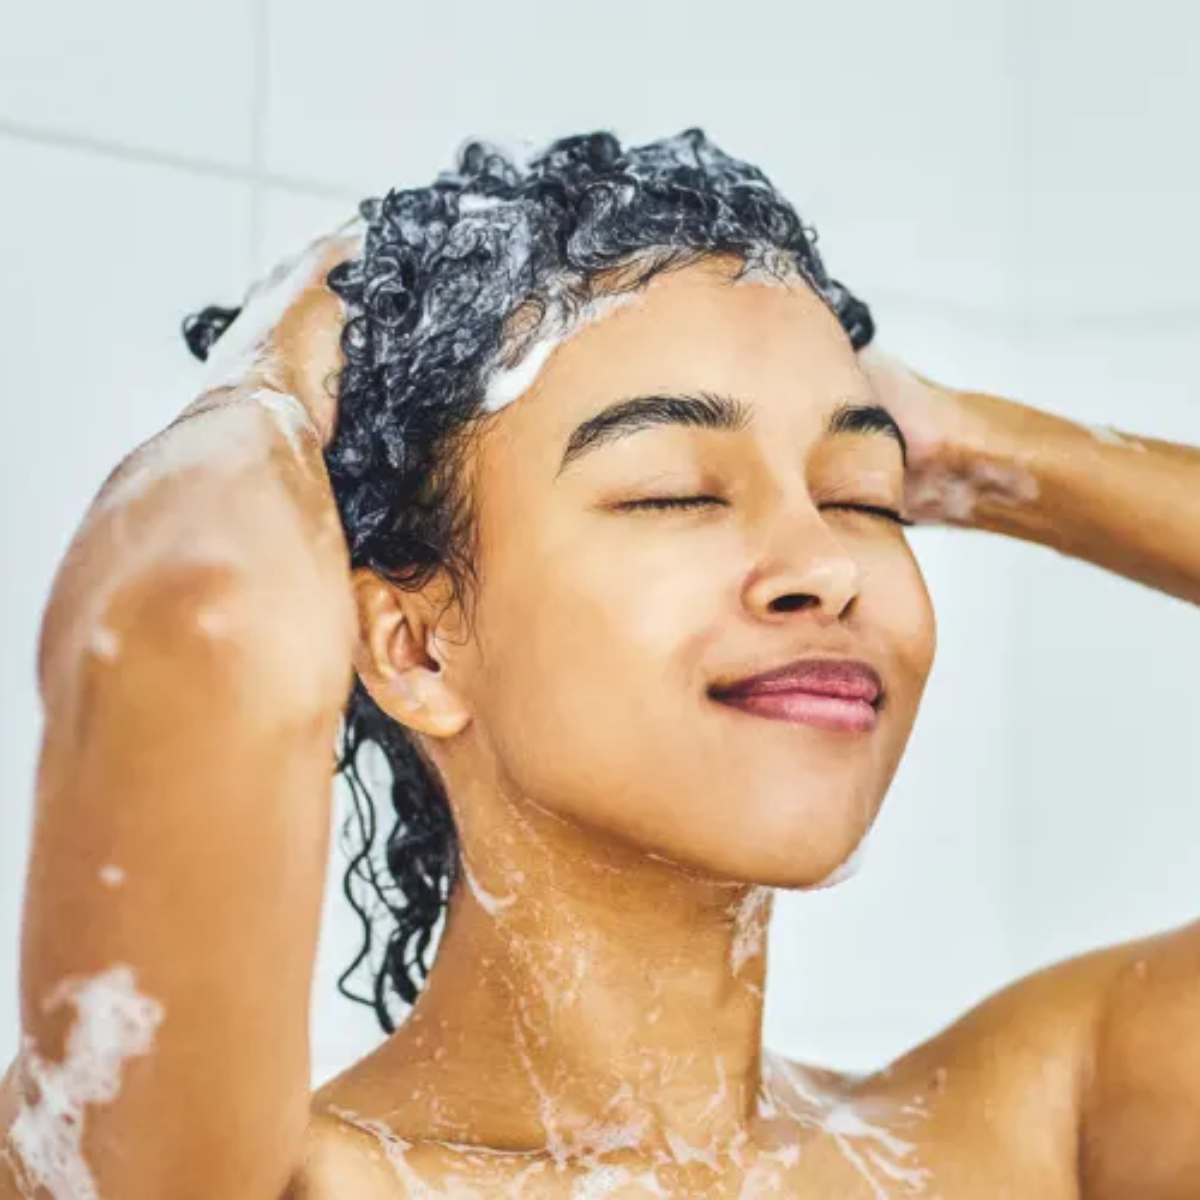 The 15 Best Sulfate-Free Shampoos For Every Hair Type — Healthy Hair Starts Here